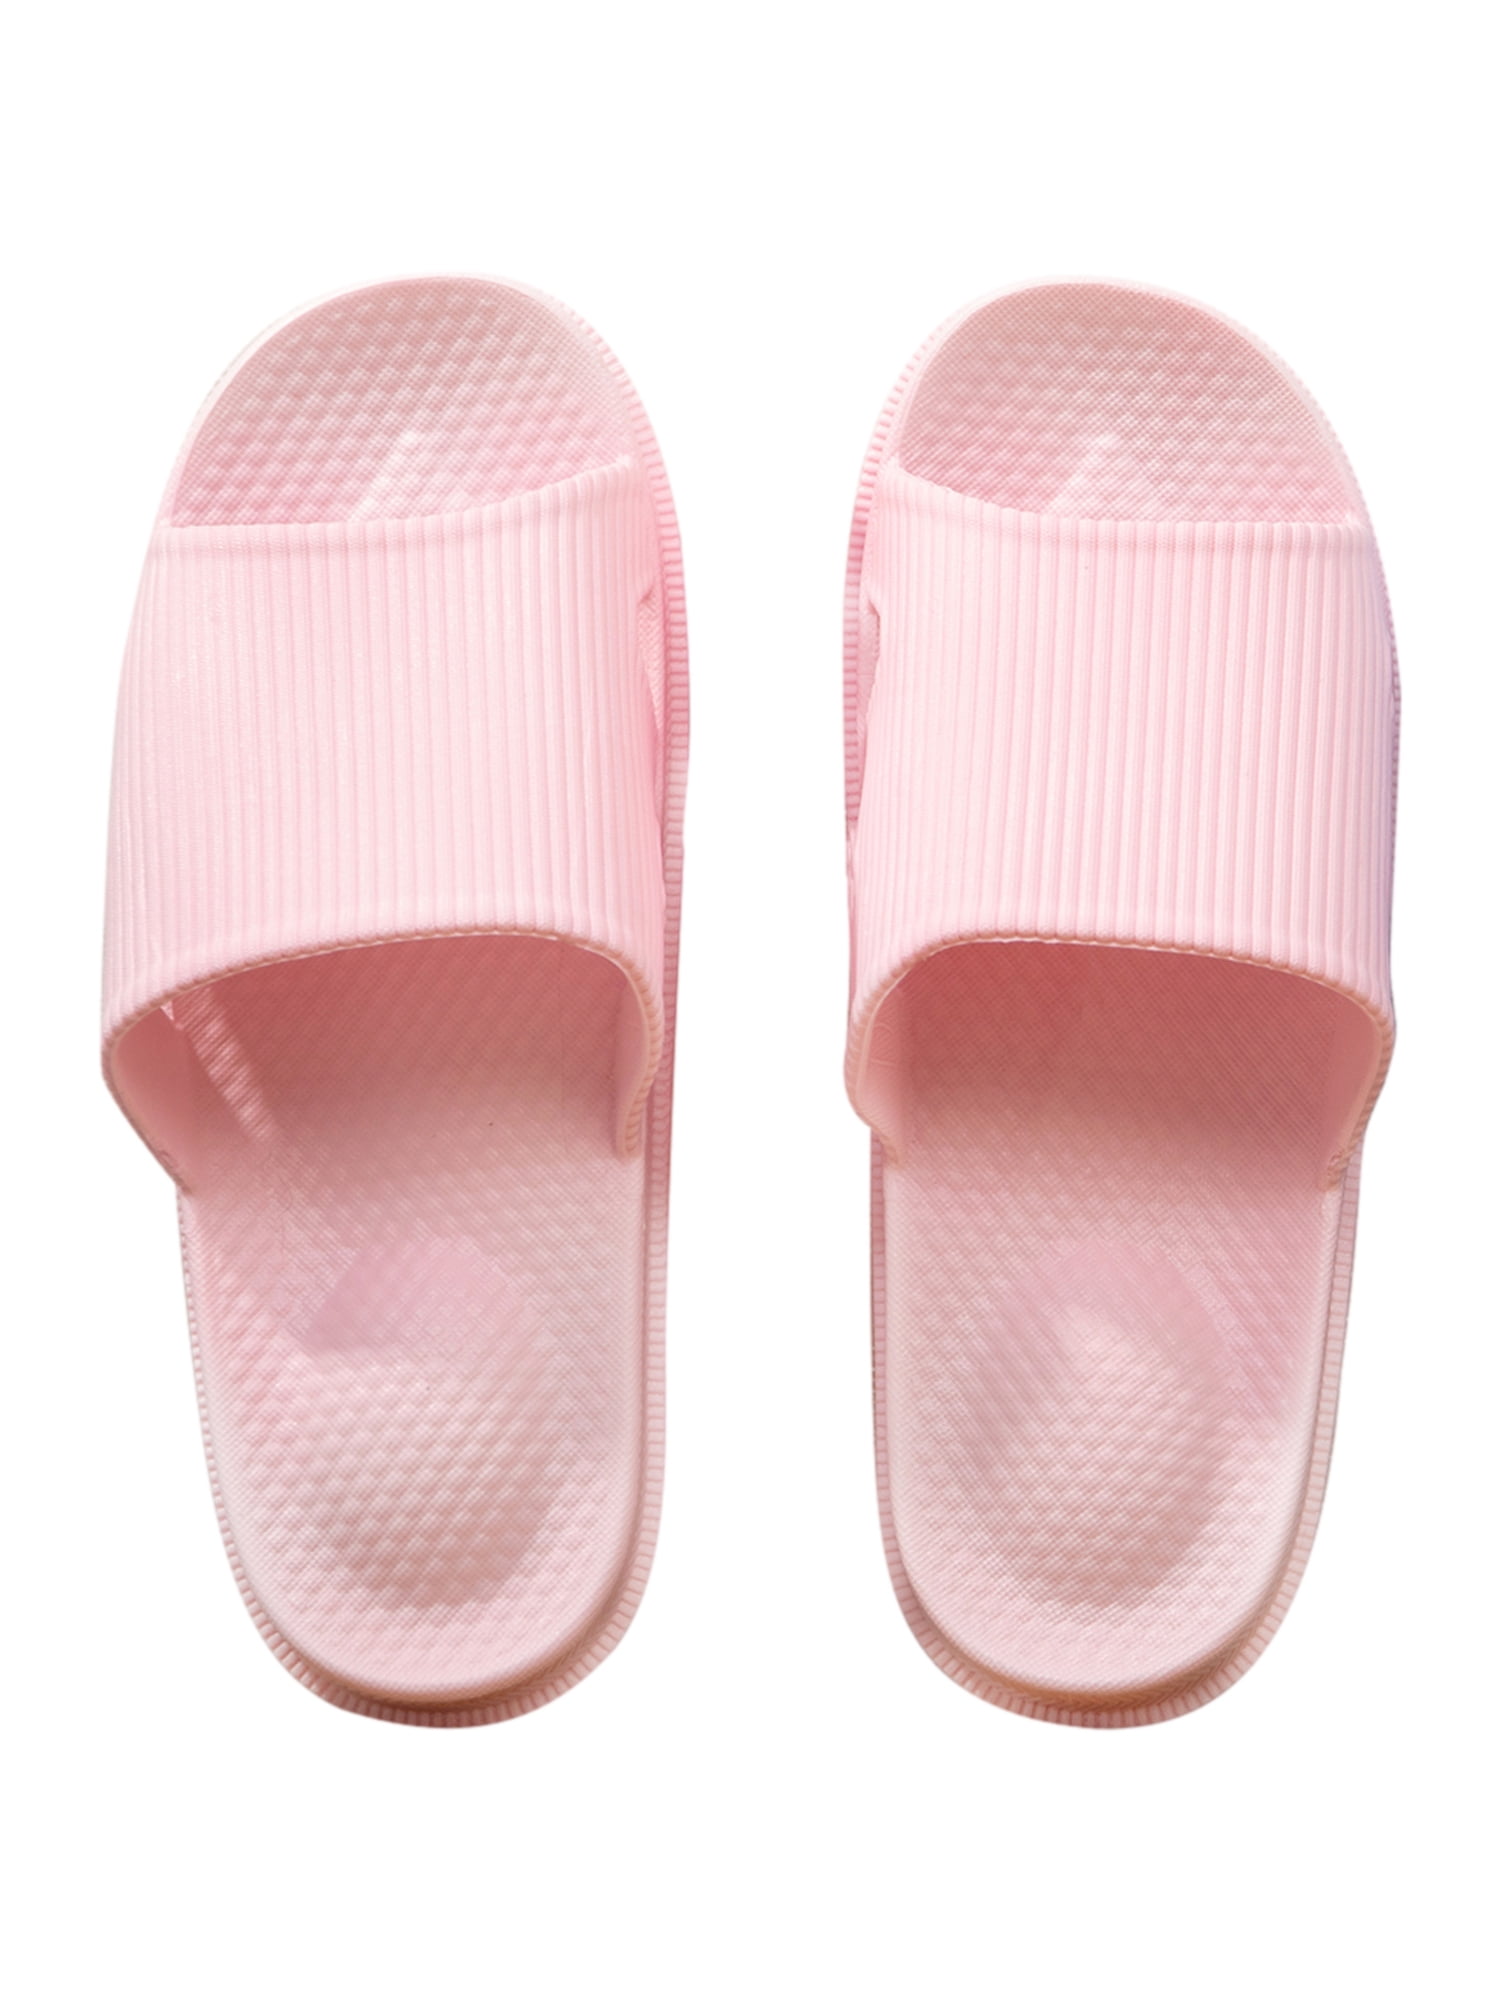 house sandals for women